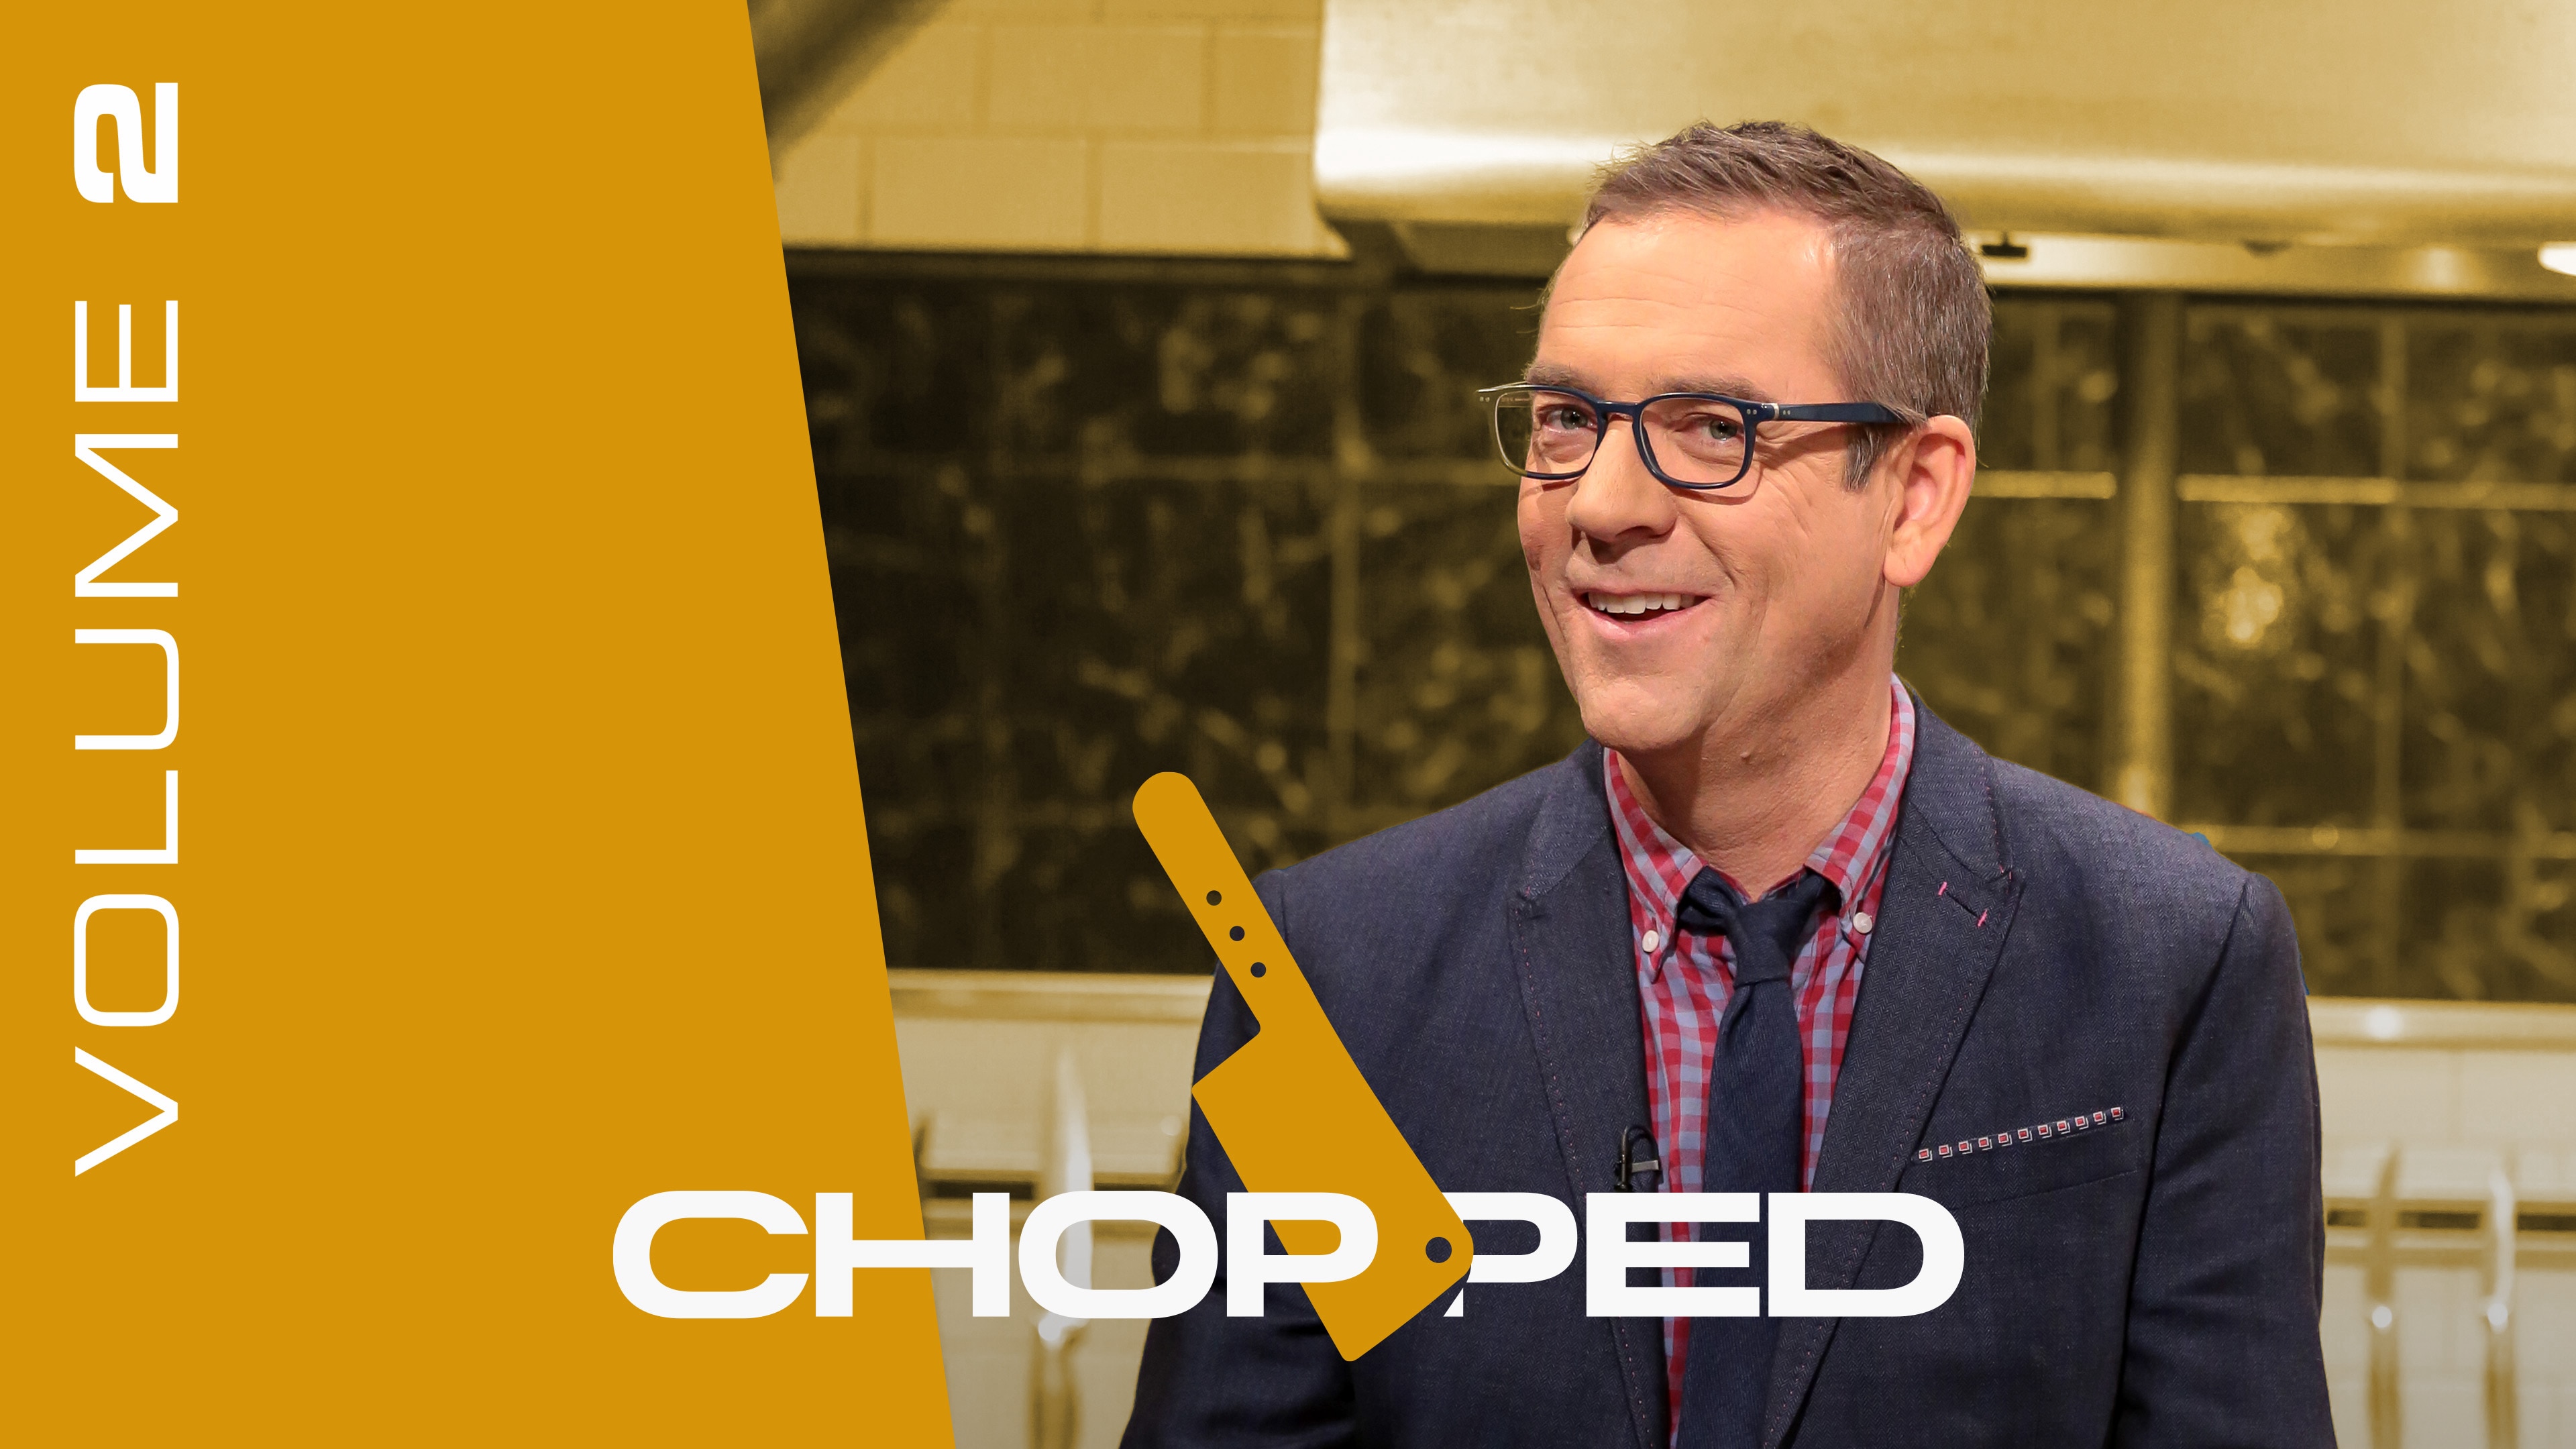 Chop Champ  As Seen On TV